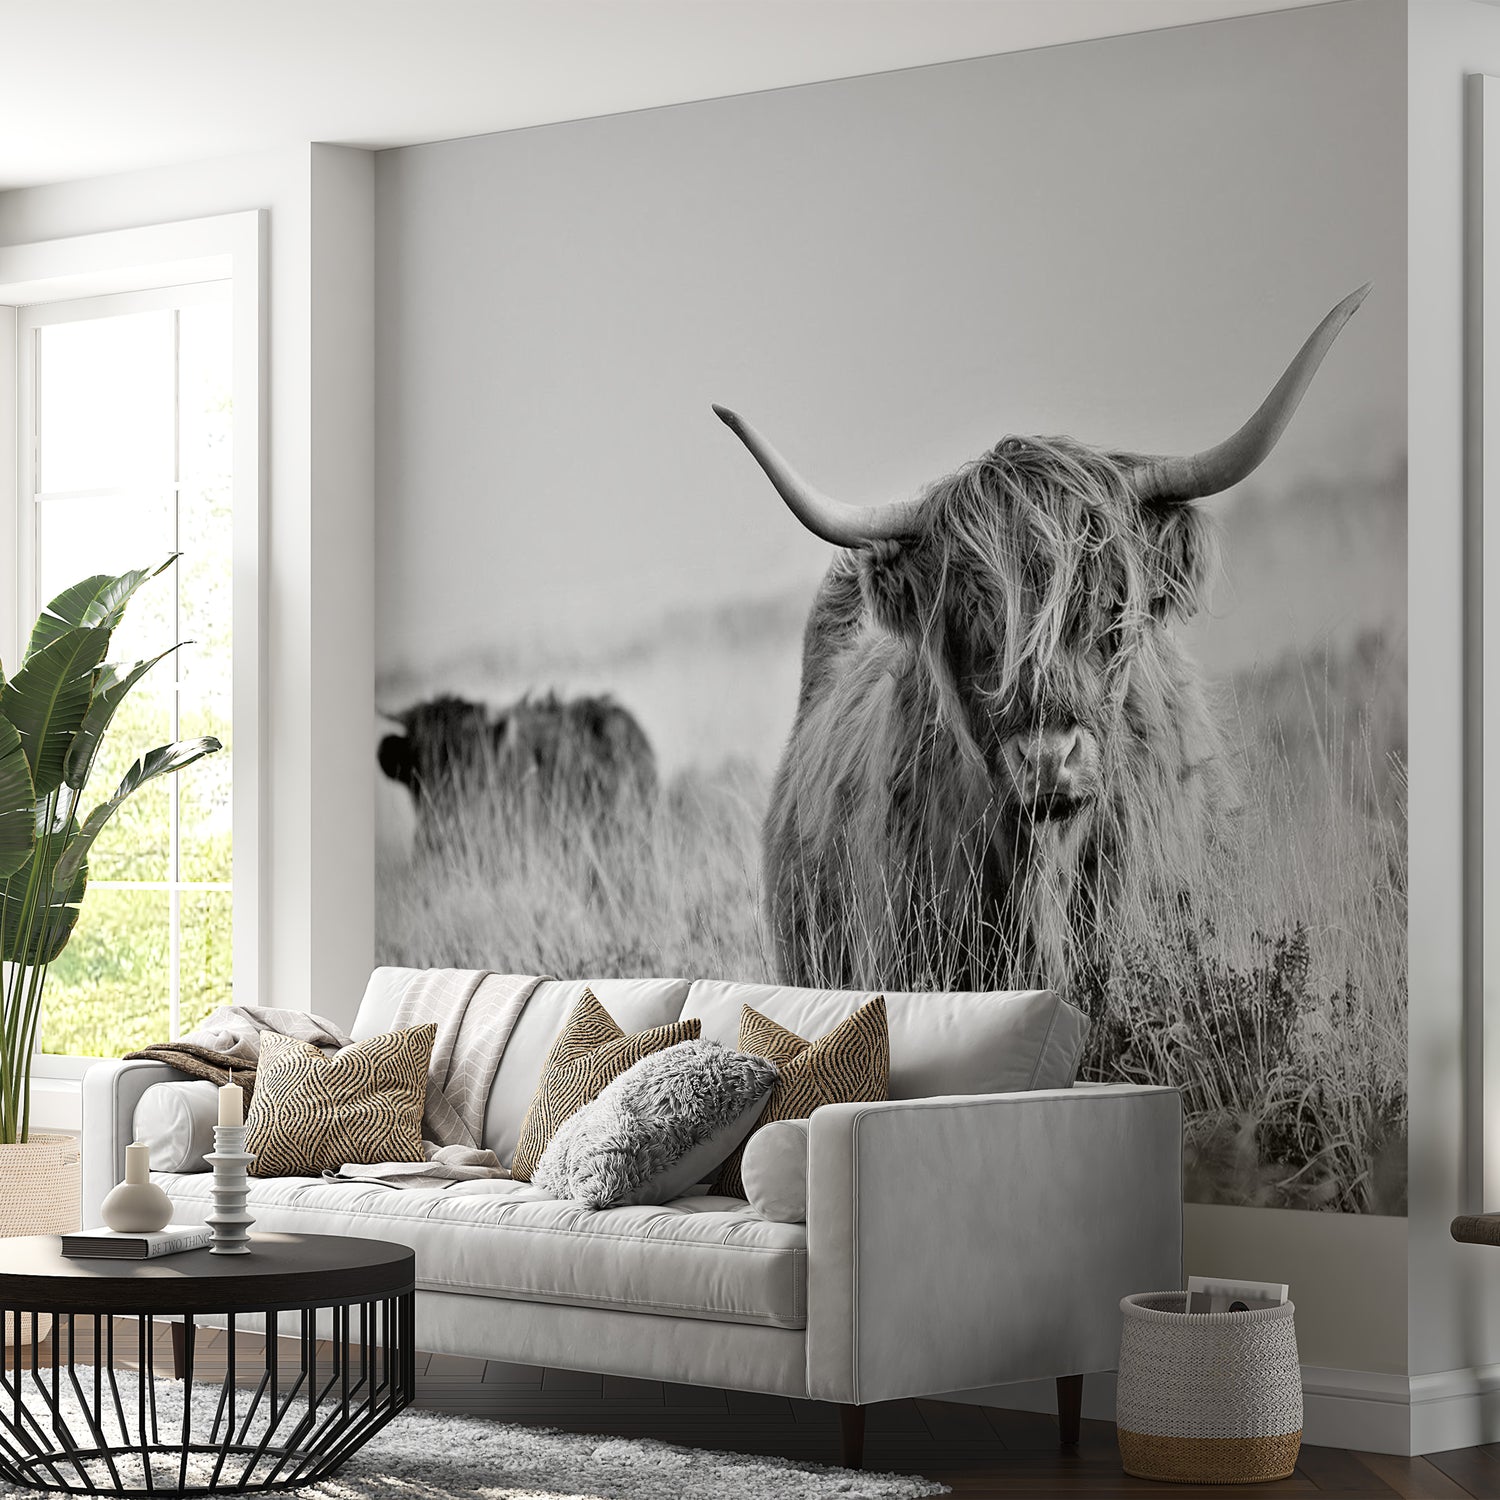 Peel & Stick Animal Wall Mural - Highland Cow - Removable Wall Decals